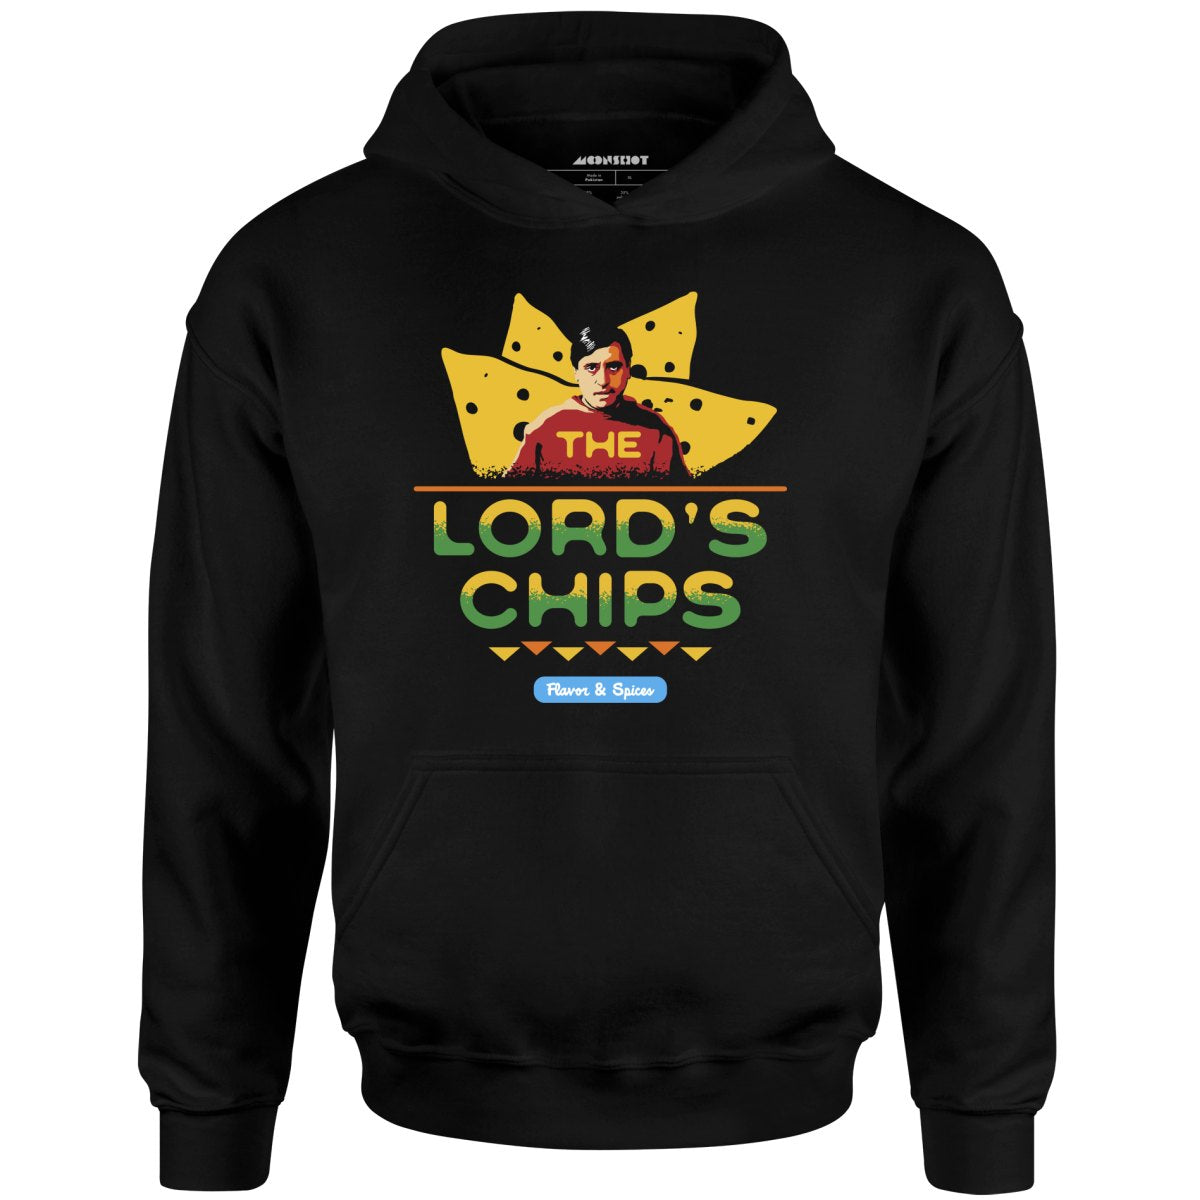 The Lord's Chips - Unisex Hoodie